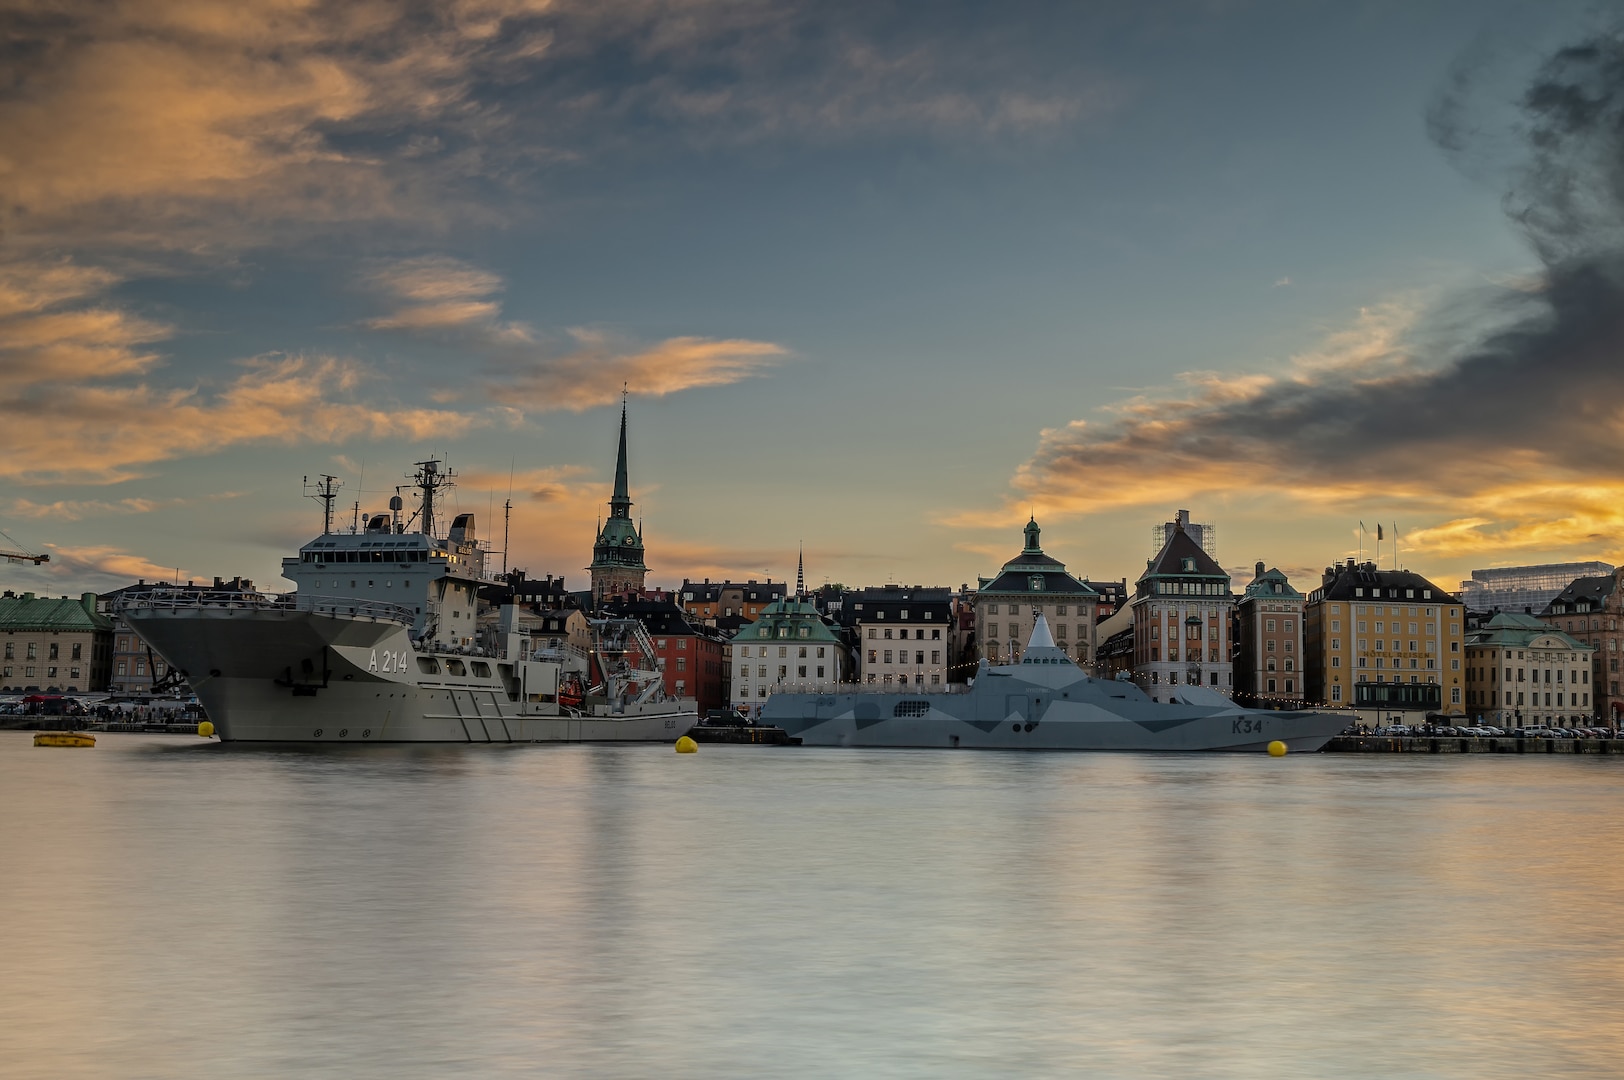 Swedish submarine rescue ship HSwMS  Belos (A214) and Visby-class corvette HSwMS Nyköping (K34) are moored in Stockholm prior to getting underway for exercise BAPTOPS22.